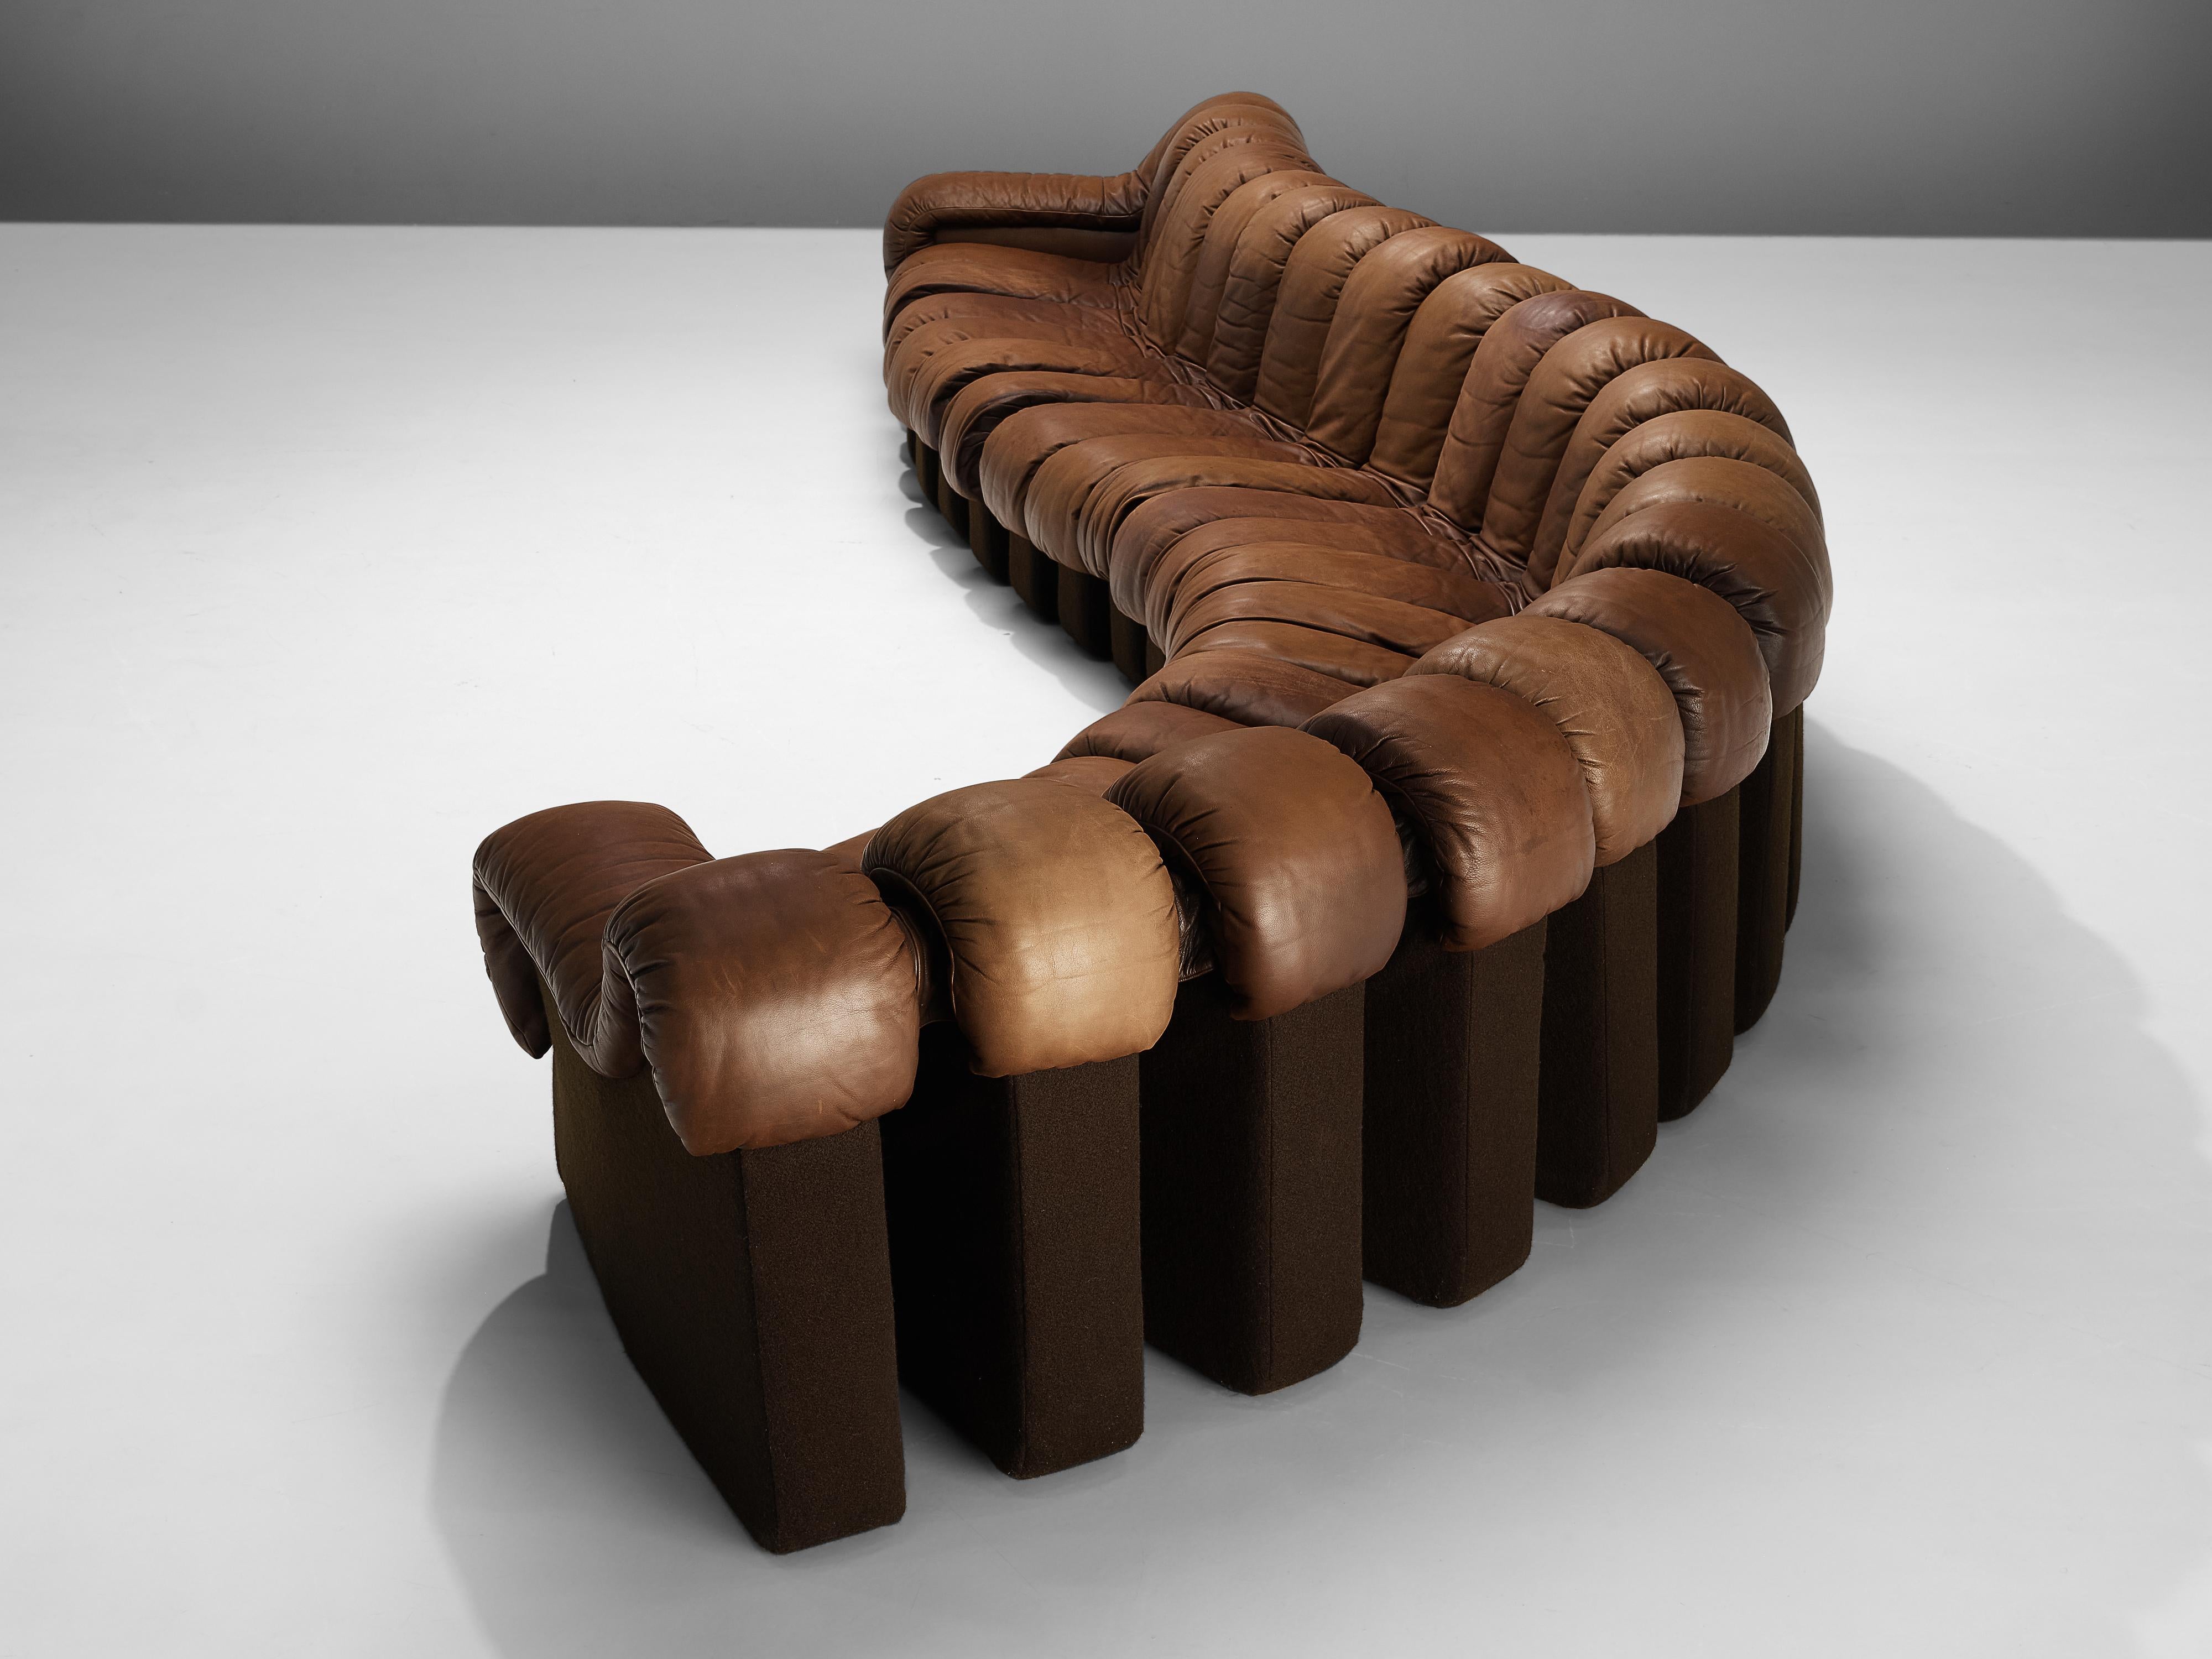 De Sede, sofa model ‘DS-600' sofa, brown leather, plastic, Switzerland, designed in 1972

De Sede 'Snake' sofa in smooth brown leather with patina. A design by Ueli Bergere, Elenora Peduzzi-Riva, Heinz Ulrich and Klaus Vogt at DeSede, Switzerland.